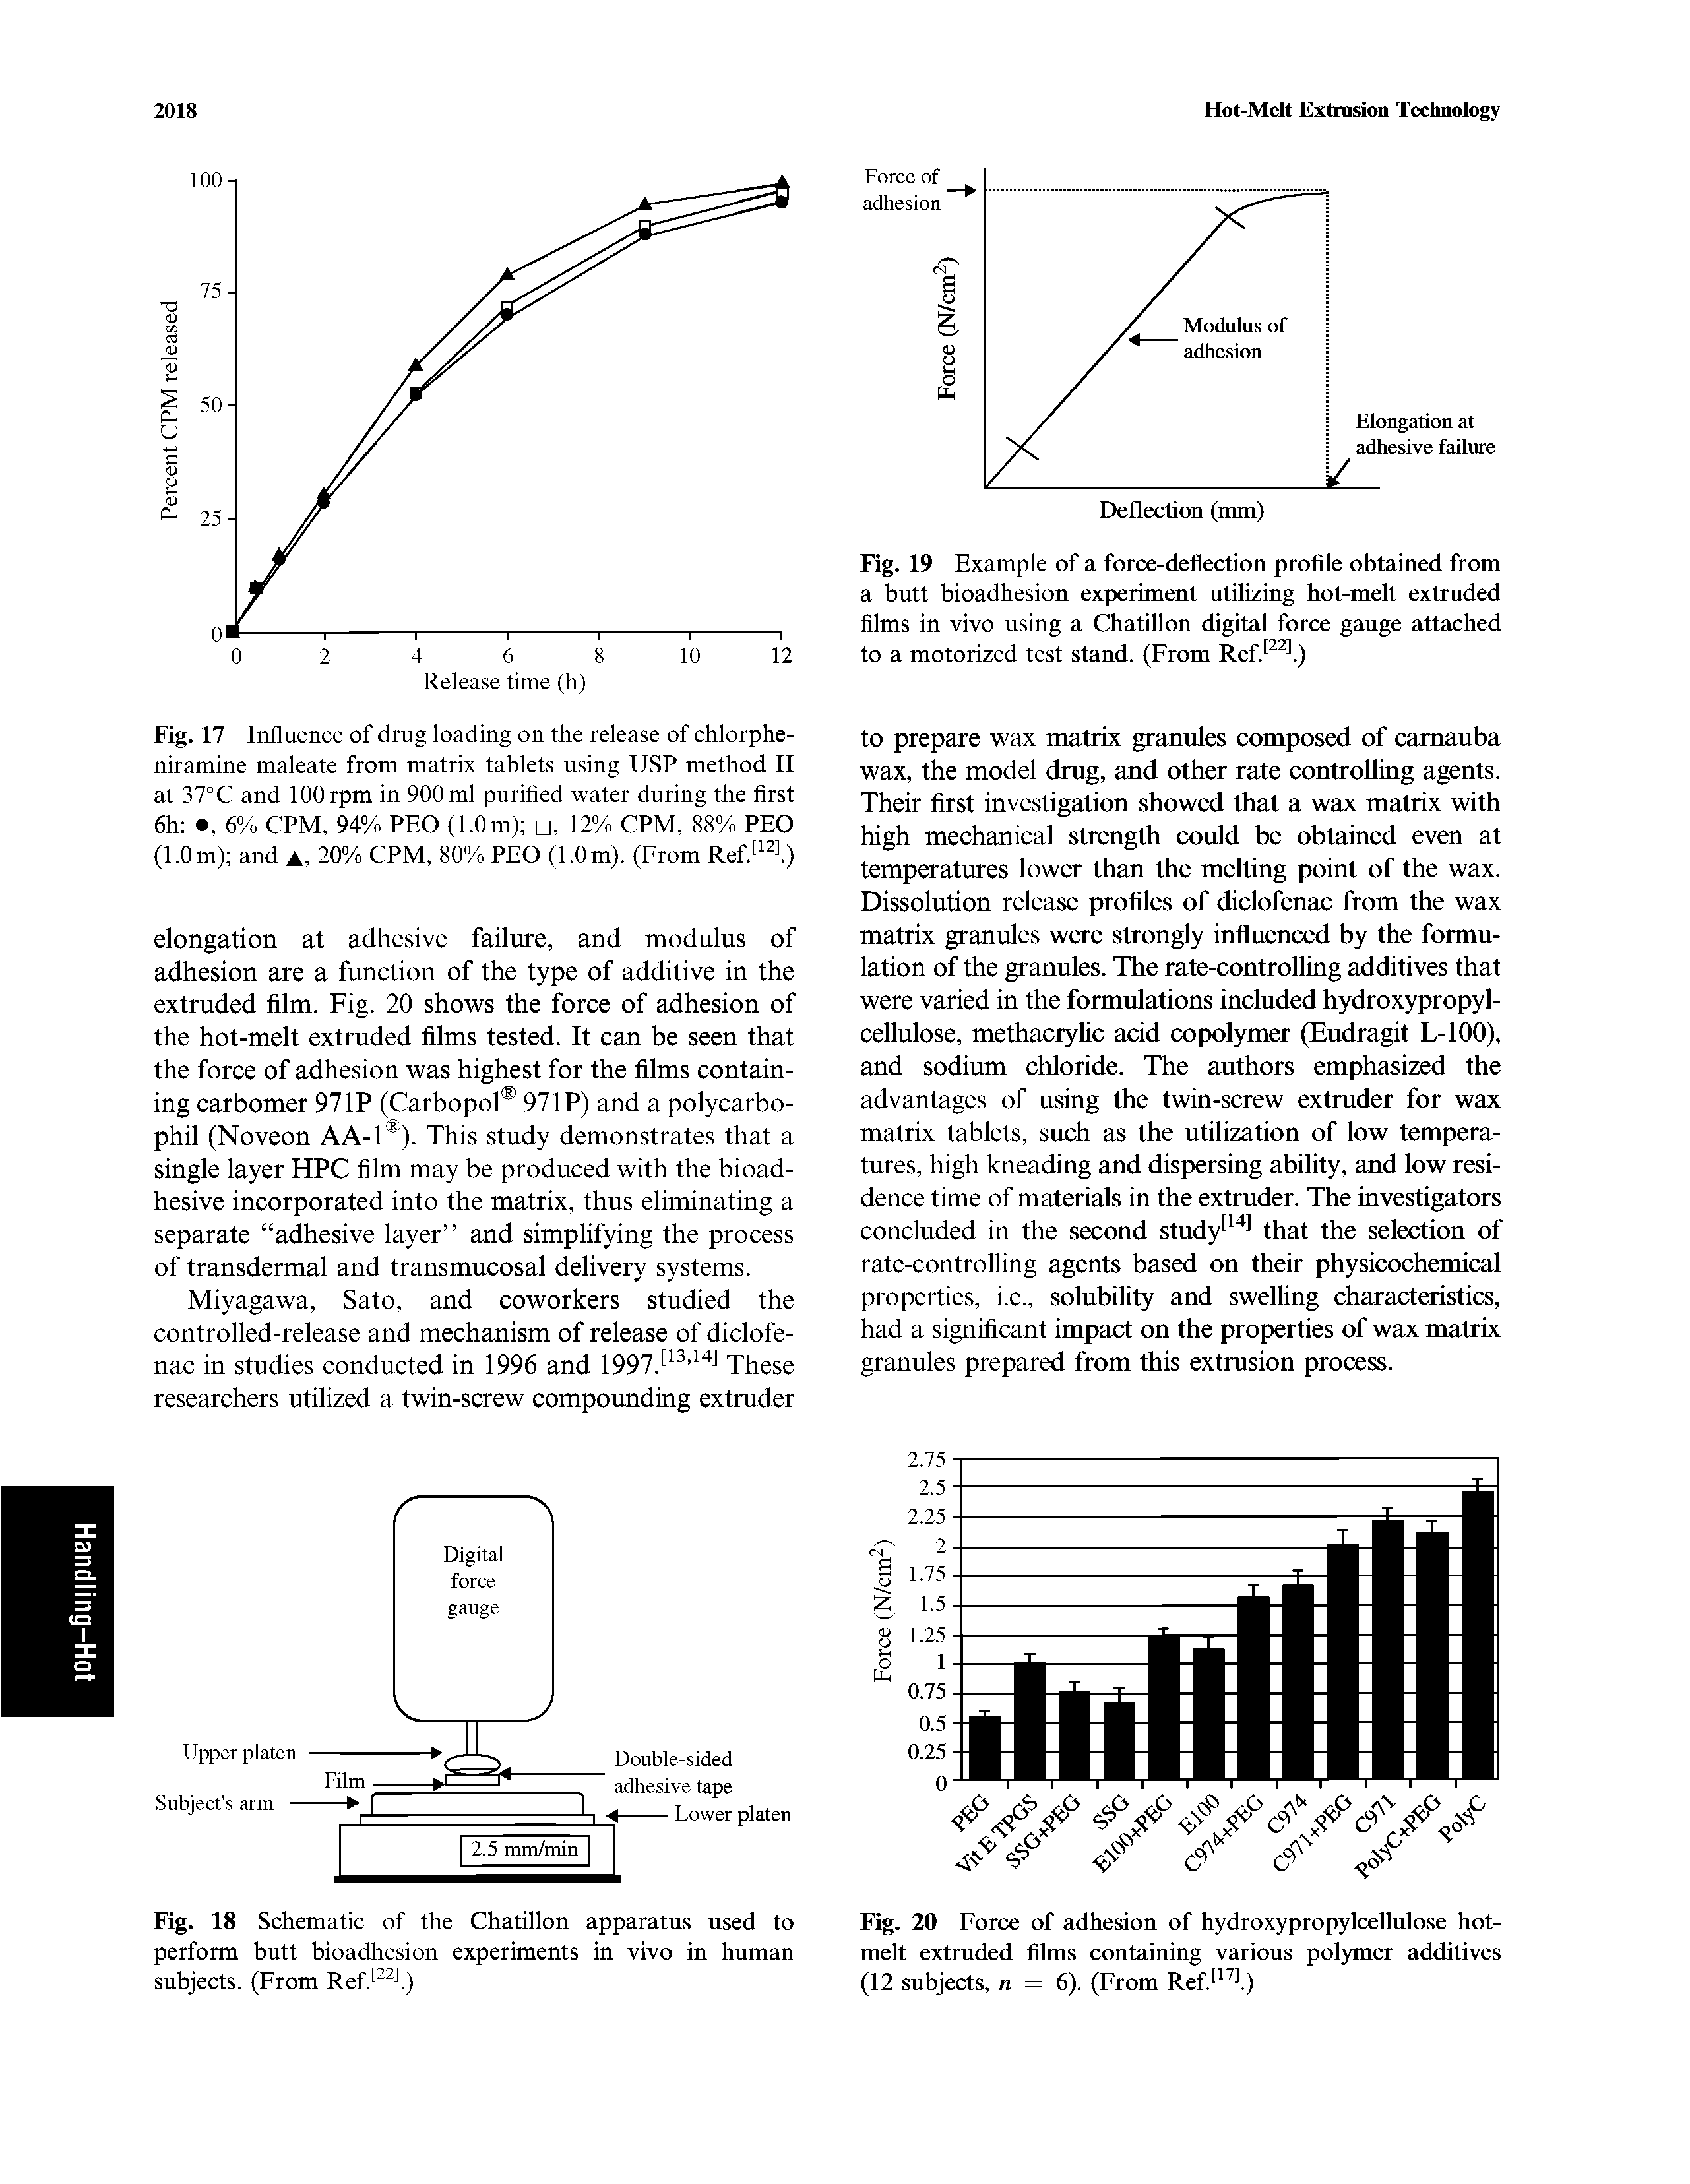 Fig. 19 Example of a force-deflection profile obtained from a butt bioadhesion experiment utilizing hot-melt extruded films in vivo using a Chatillon digital force gauge attached to a motorized test stand. (From Ref. l)...